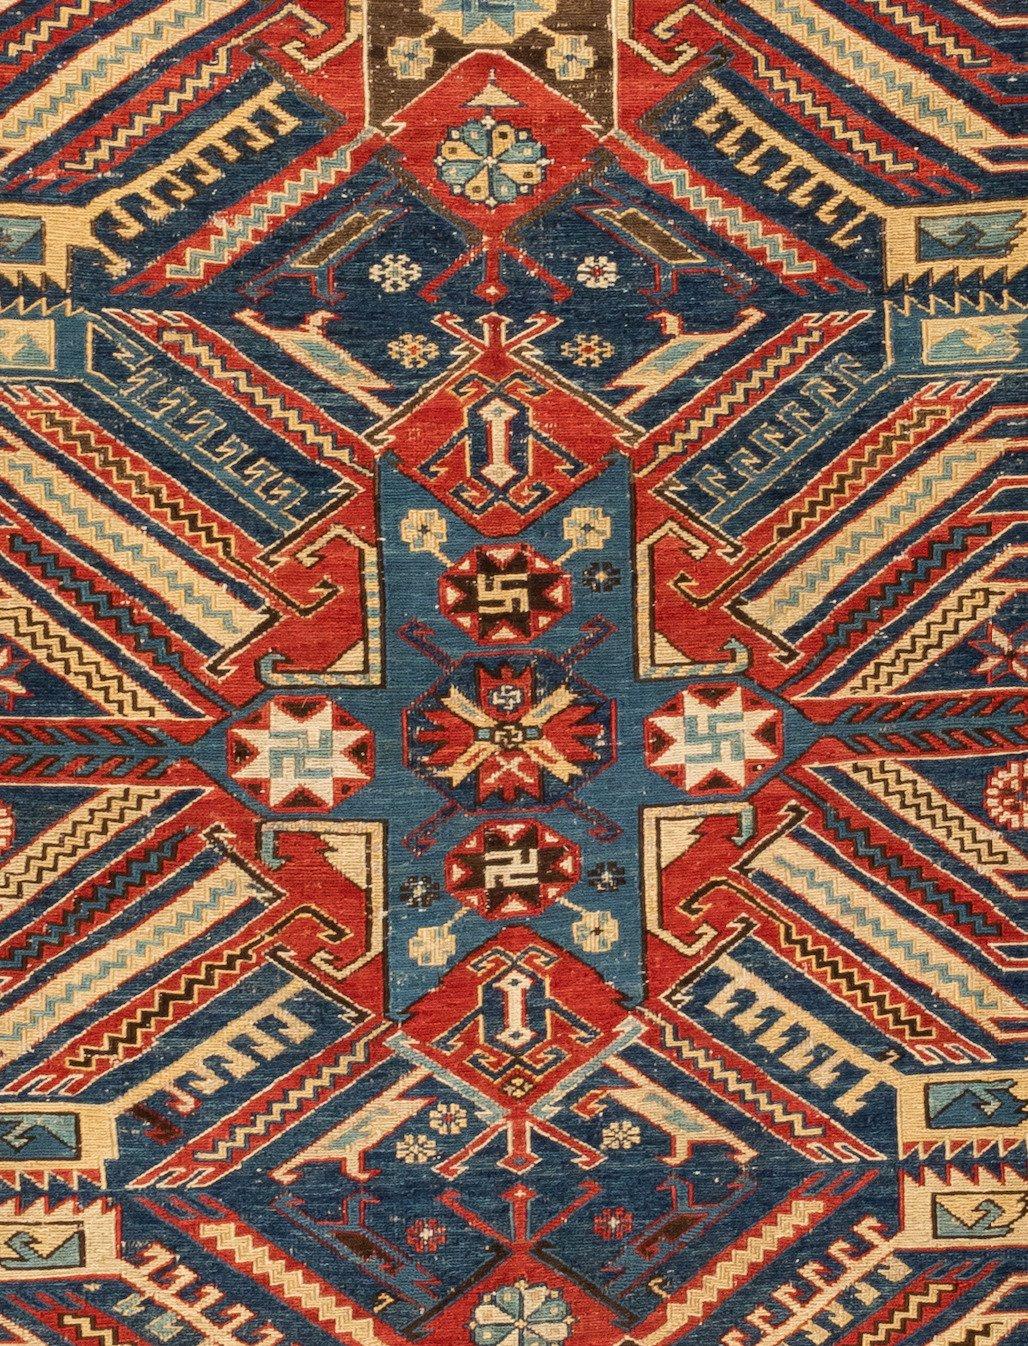 Soumak is a tapestry technique of weaving strong and decorative textiles used as rugs and domestic bags. It is a type of flat-weave, somewhat resembling but stronger and thicker than Kilim, with a smooth front face and a ragged back, where Kilim is